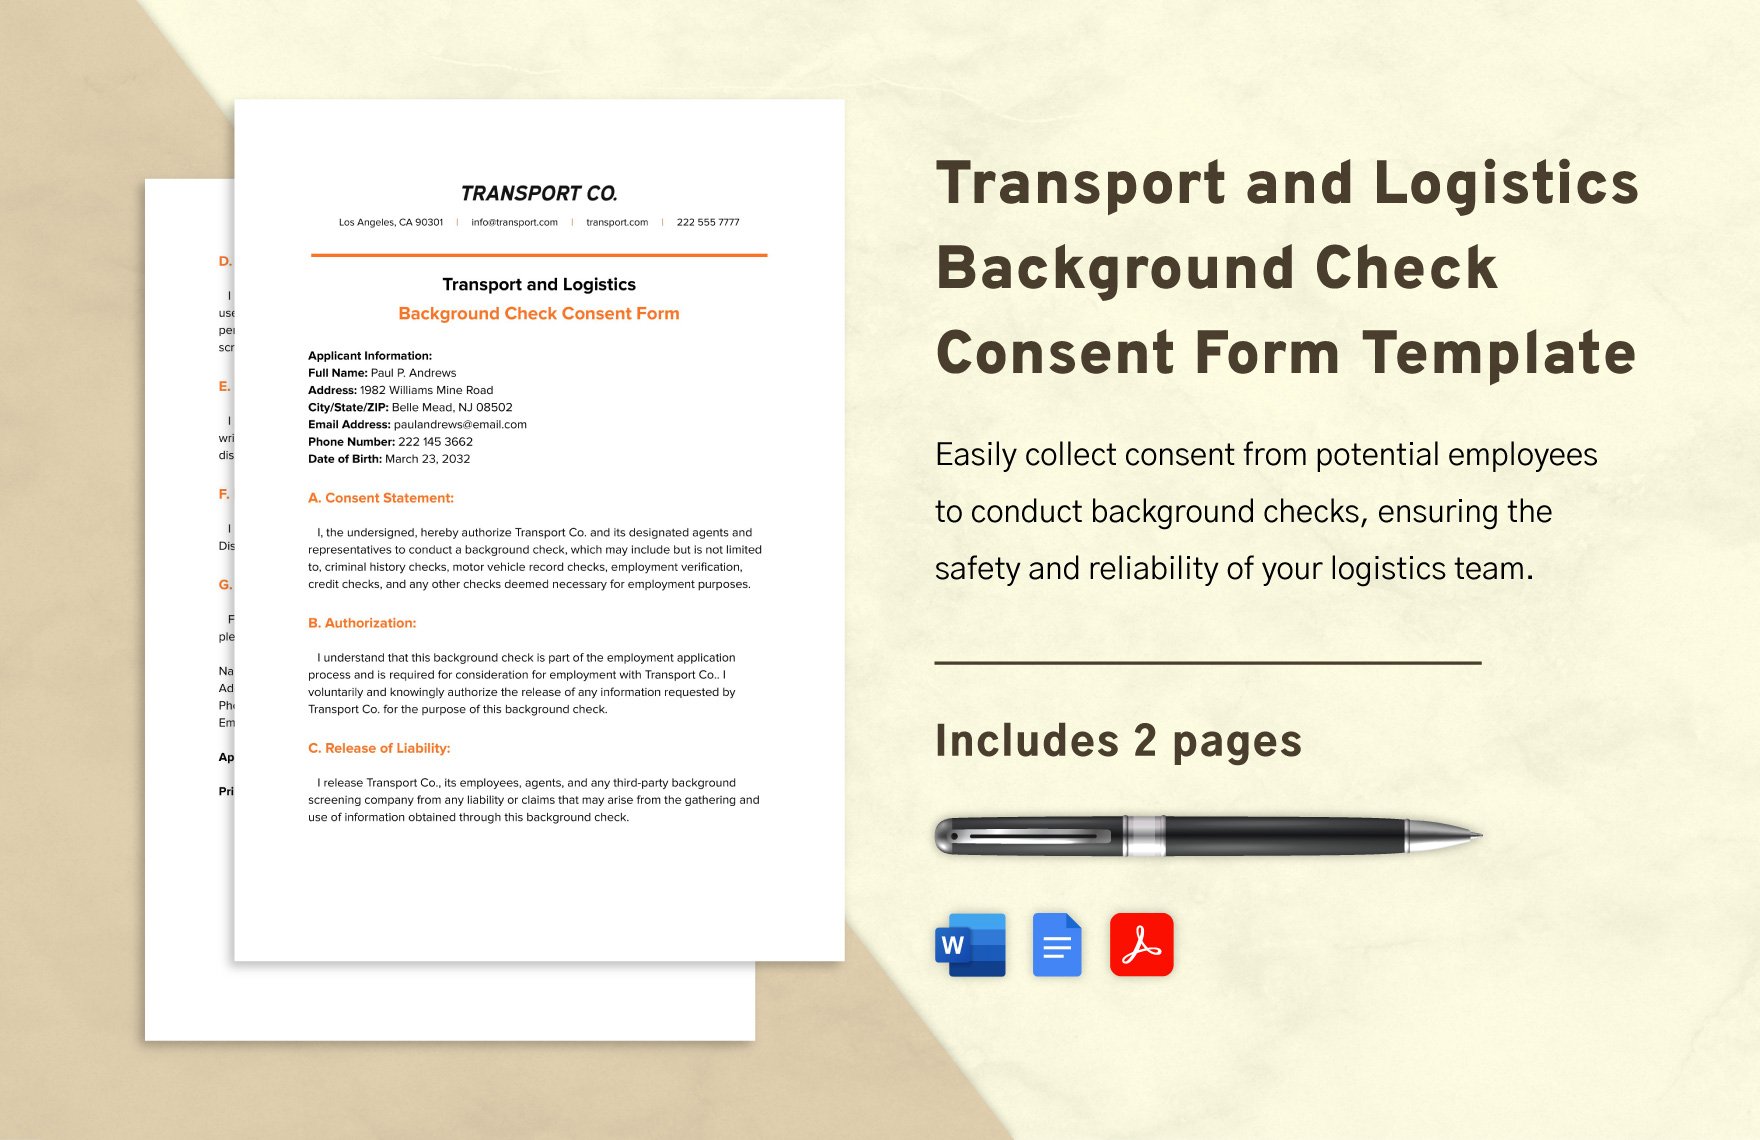 Transport and Logistics Background Check Consent Form Template